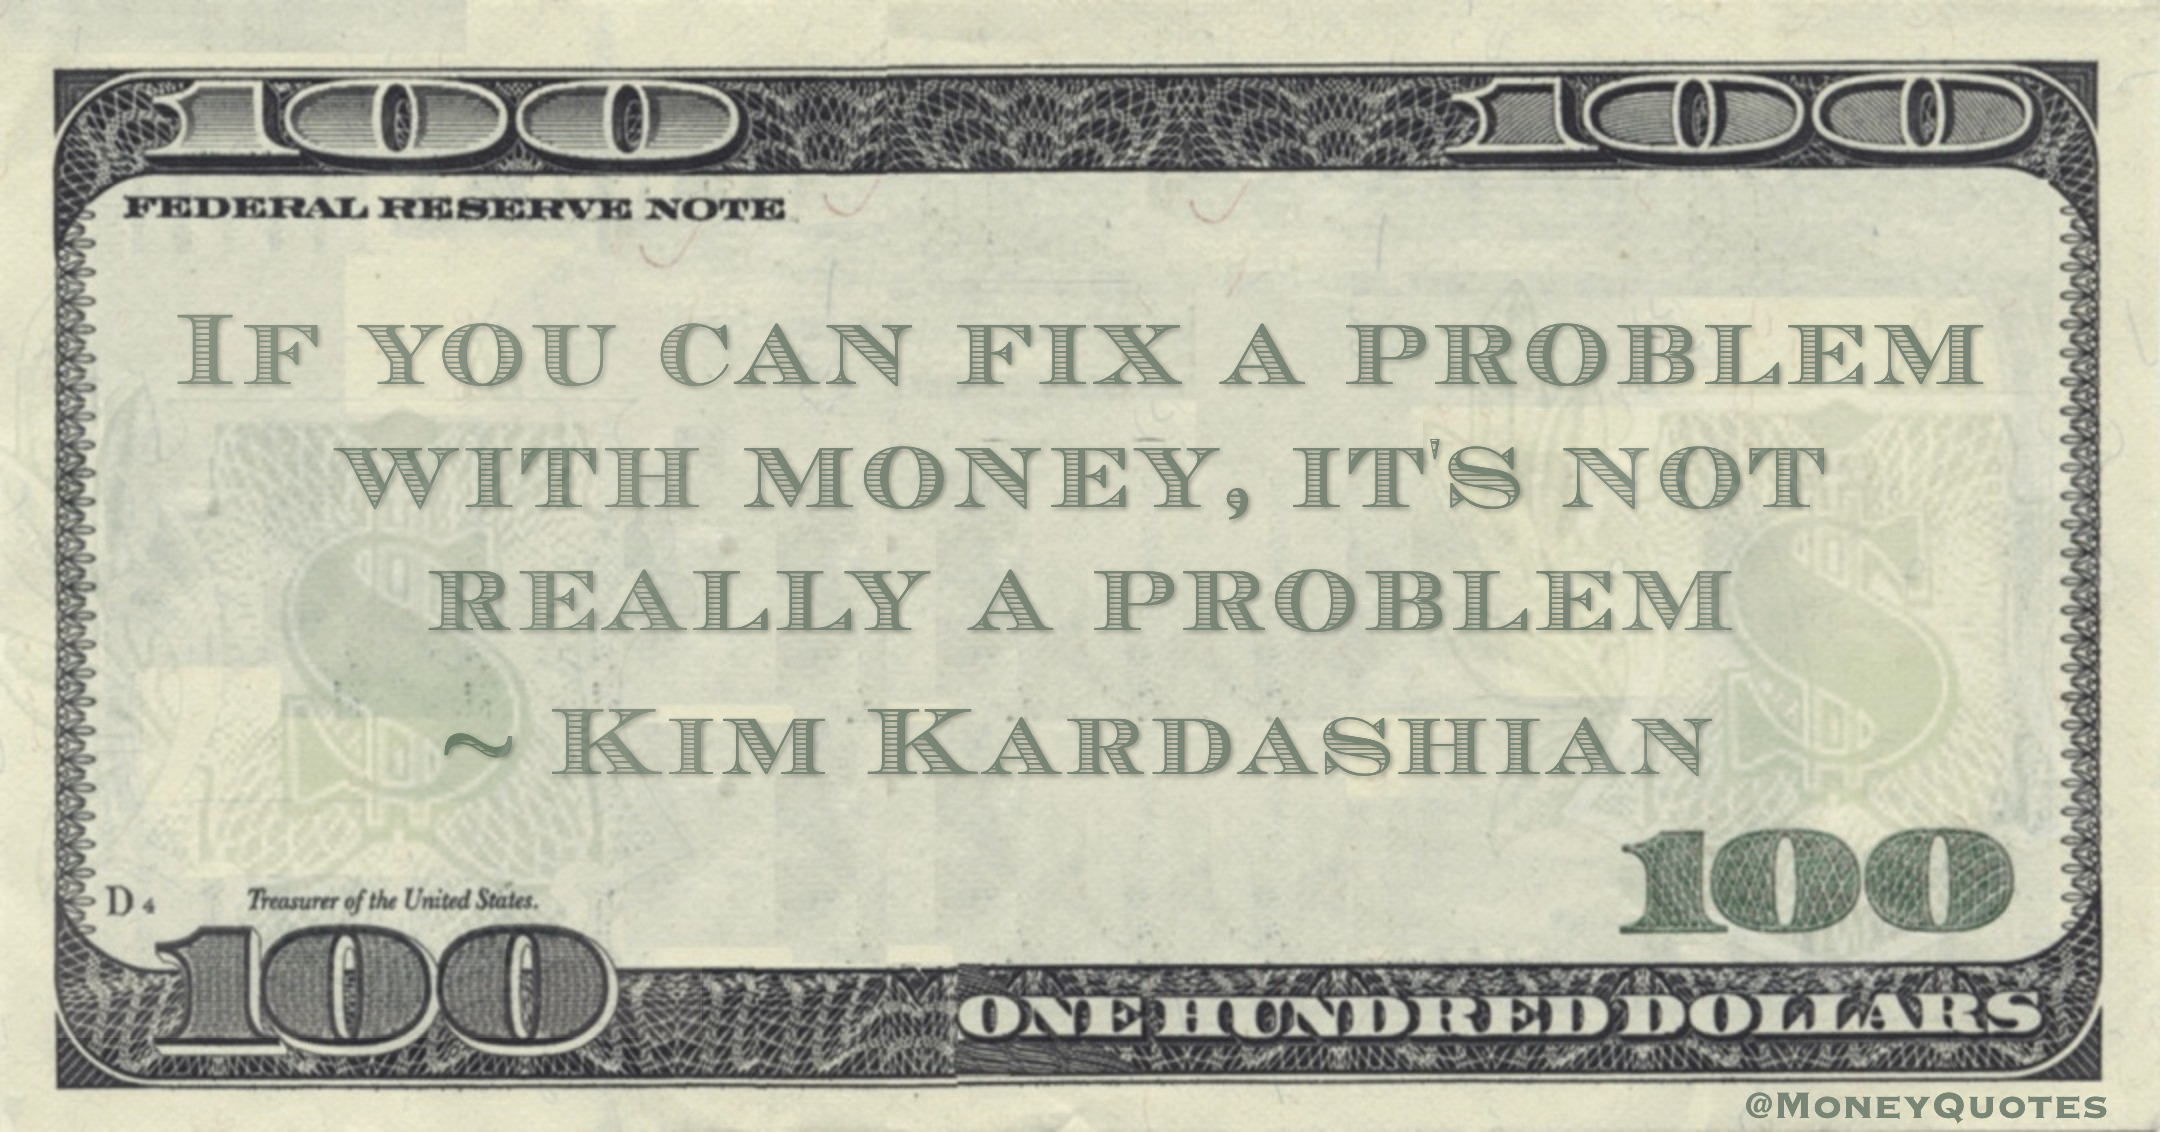 If you can fix a problem with money, it's not really a problem Quote